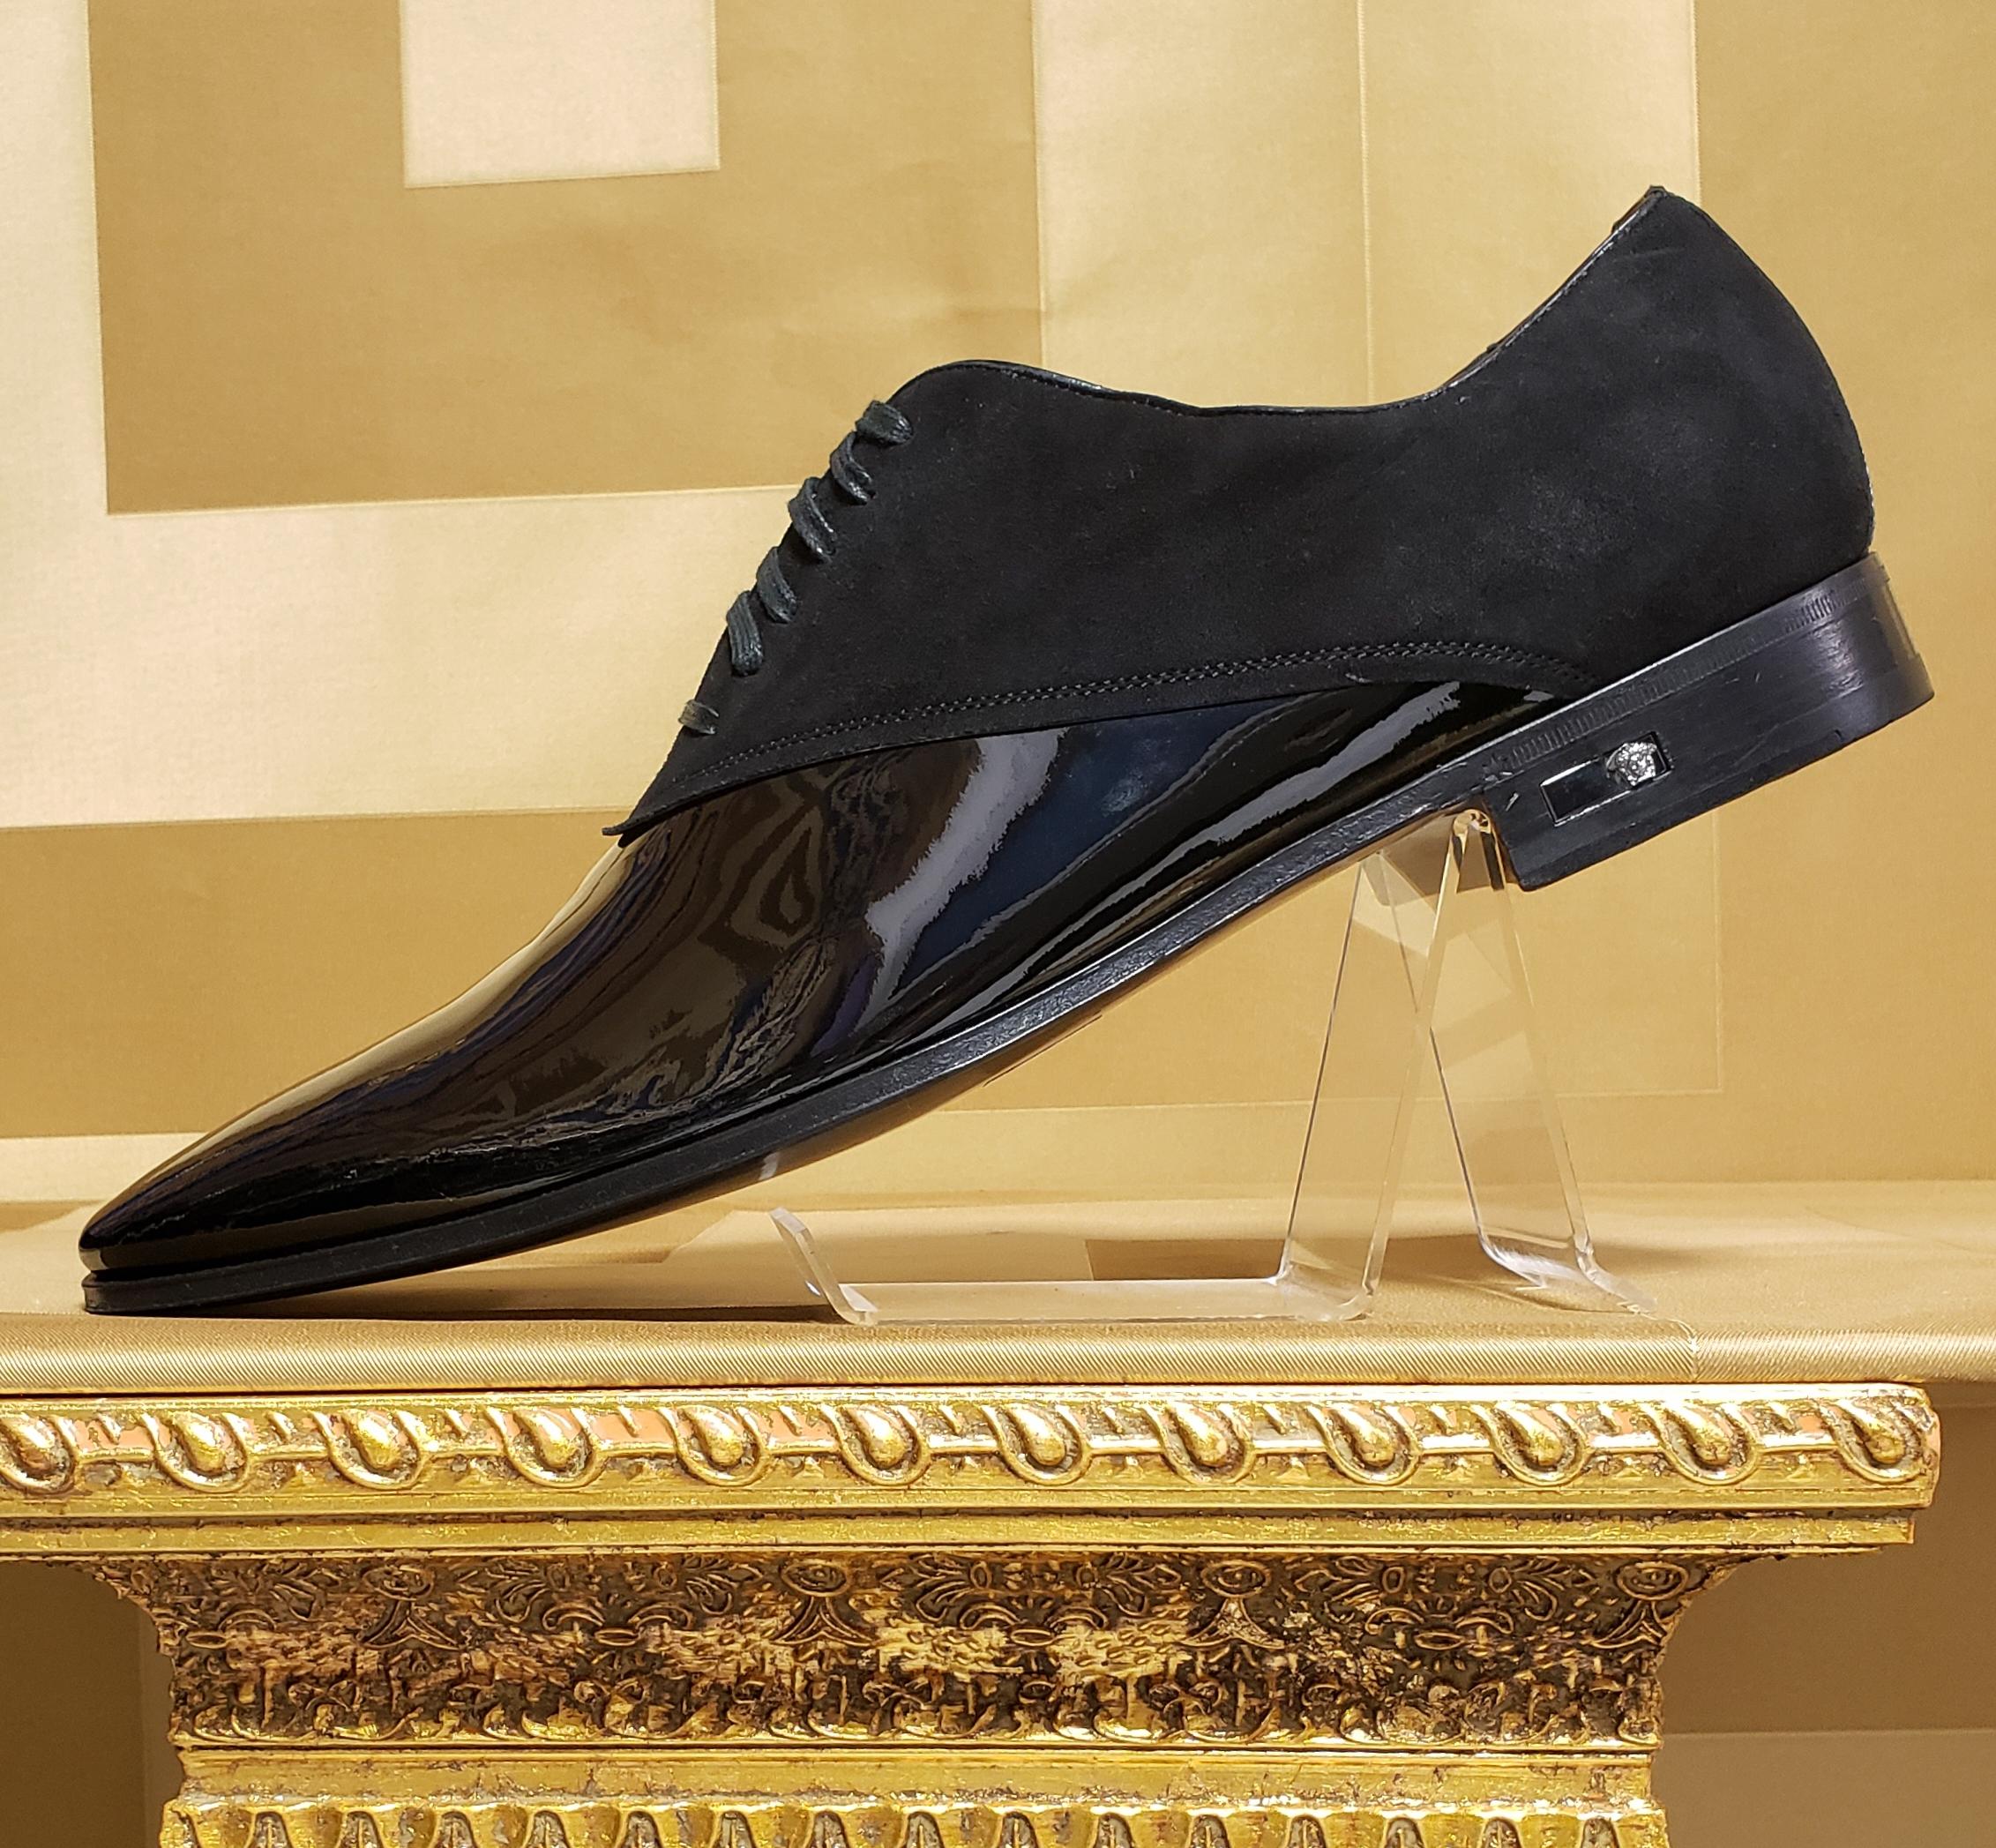 S/S 2011 look # 36 NEW VERSACE BLACK PATENT LEATHER LOAFER with SUEDE 44 - 11 For Sale 1